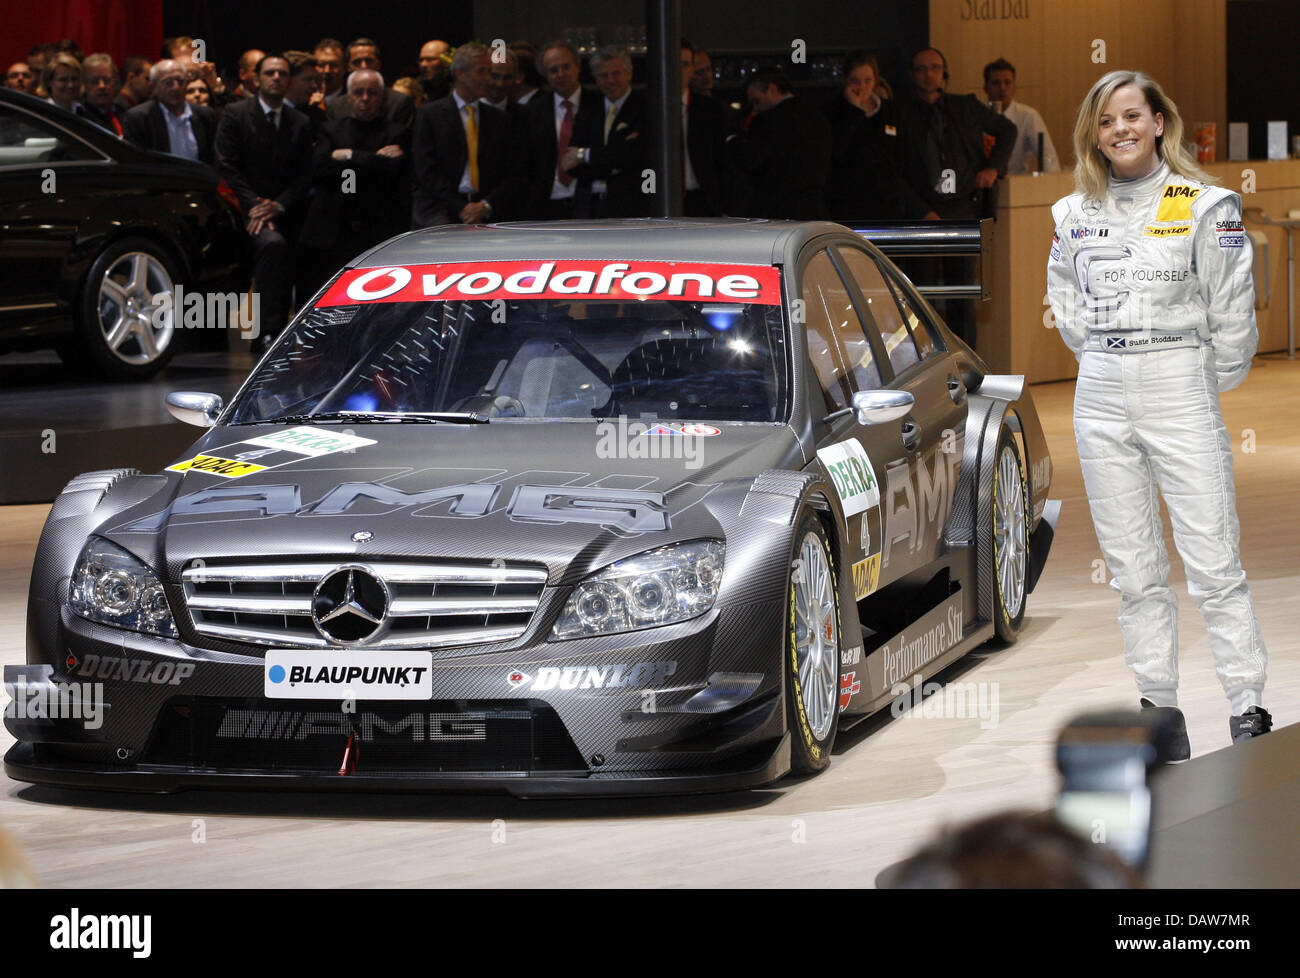 The AMG Mercedes C-Class DTM 2007 is presented by DTM pilot Susie Stoddart (R) at the Geneva Motor Show in Geneva, Switzerland, Tuesday, 06 March 2007. The trade show running from 8 to 18 March presents the latest developments of the automobile industry. Photo: Uli Deck Stock Photo